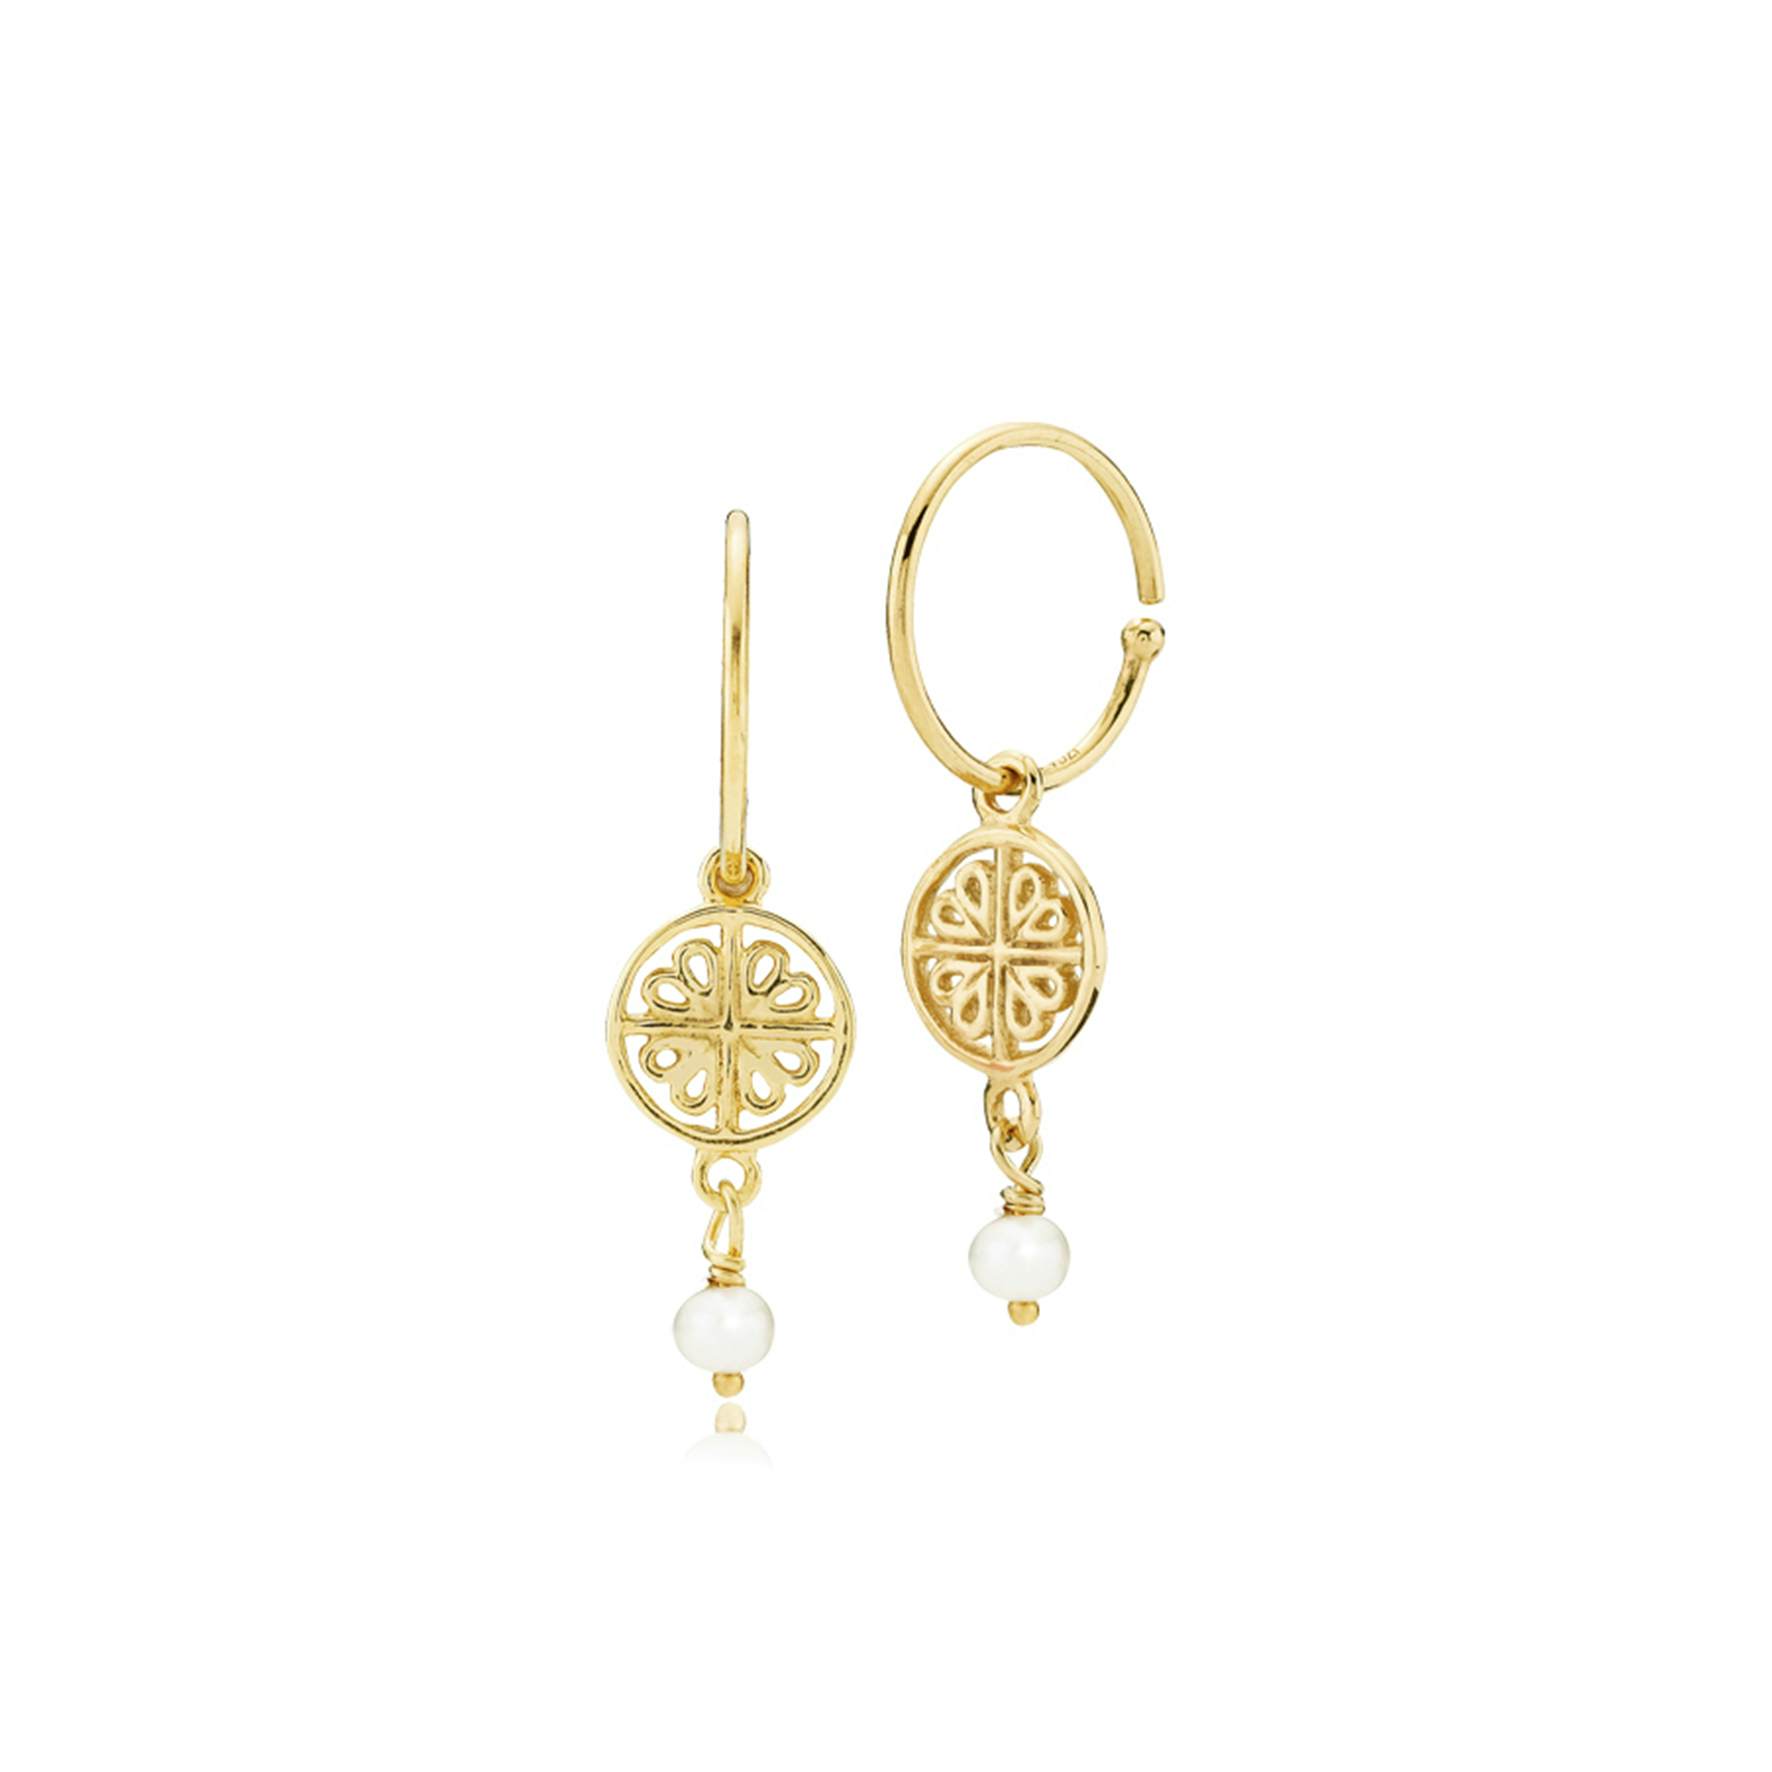 Balance Creol Earrings With Pearl from Sistie in Goldplated-Silver Sterling 925